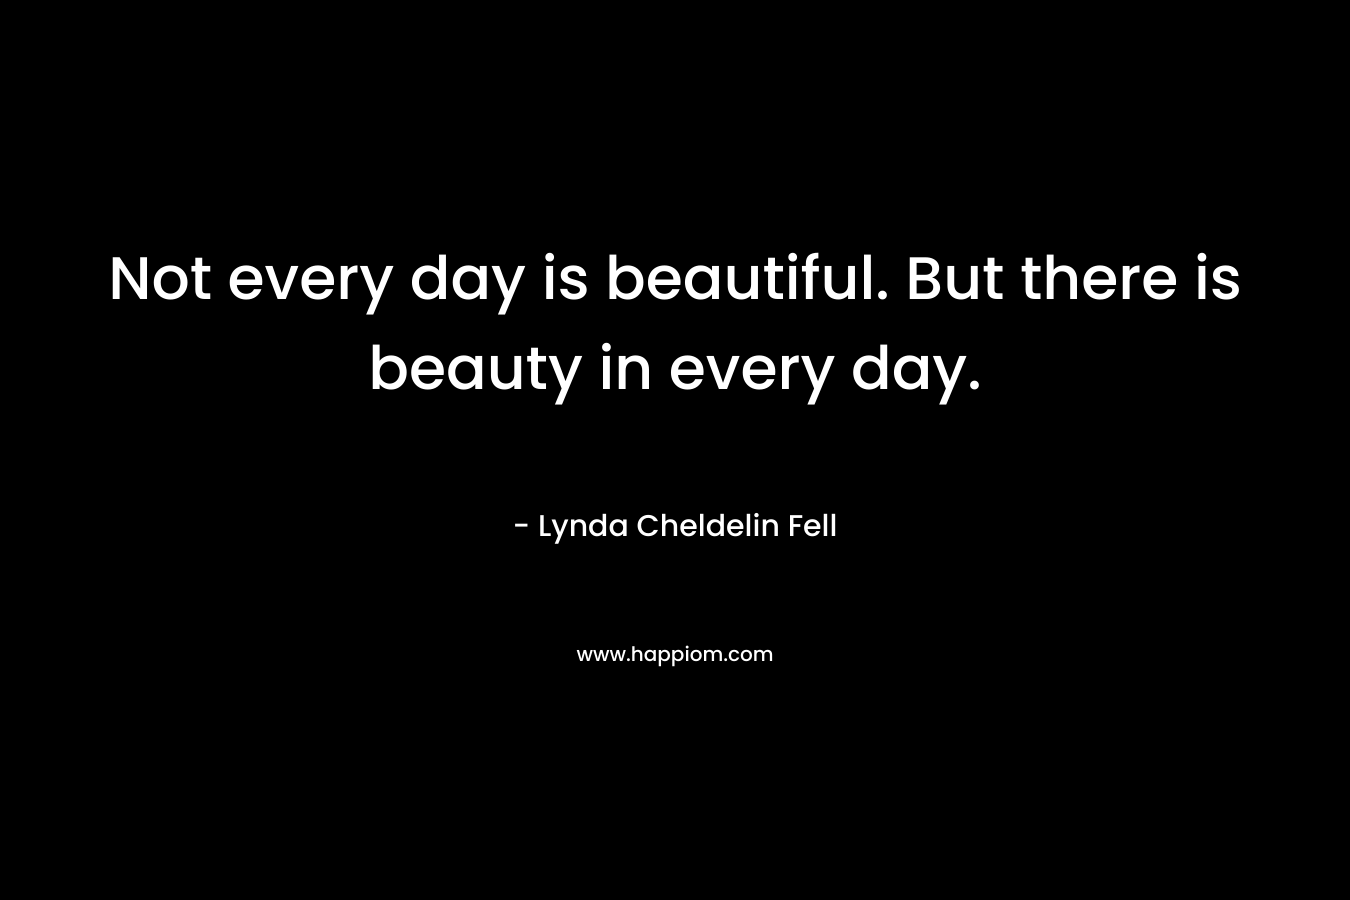 Not every day is beautiful. But there is beauty in every day. – Lynda Cheldelin Fell